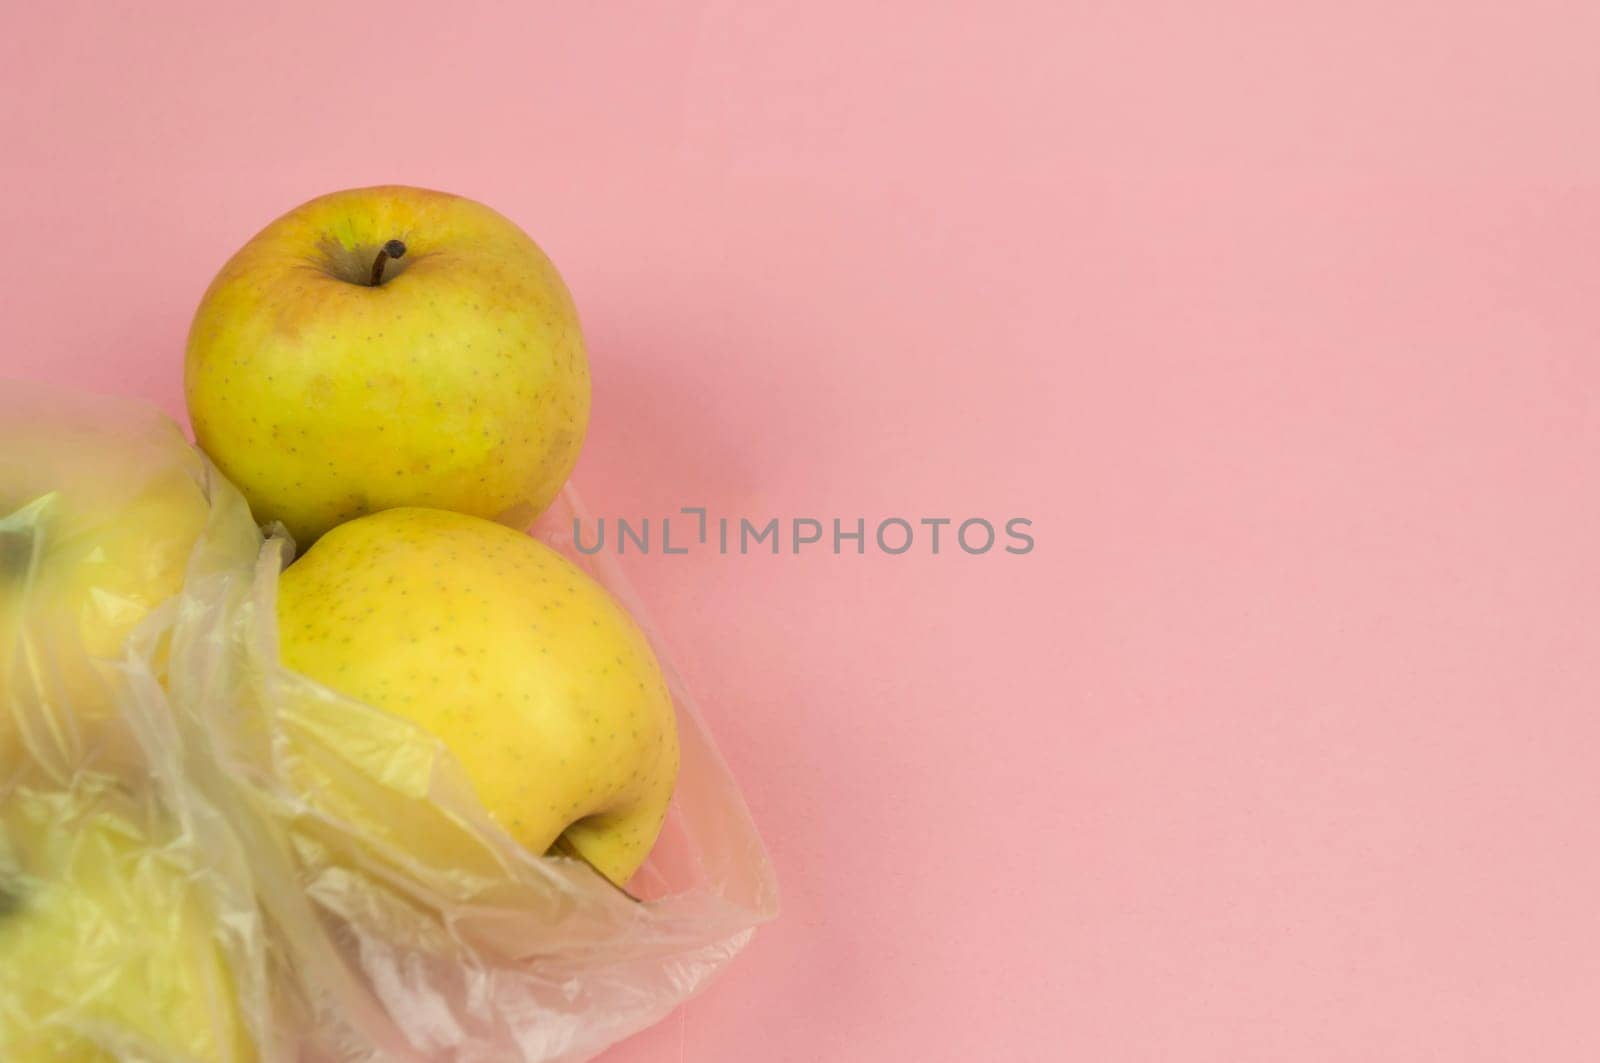 Three apples in a plastic bag on a pink background. The apples are yellow and shiny